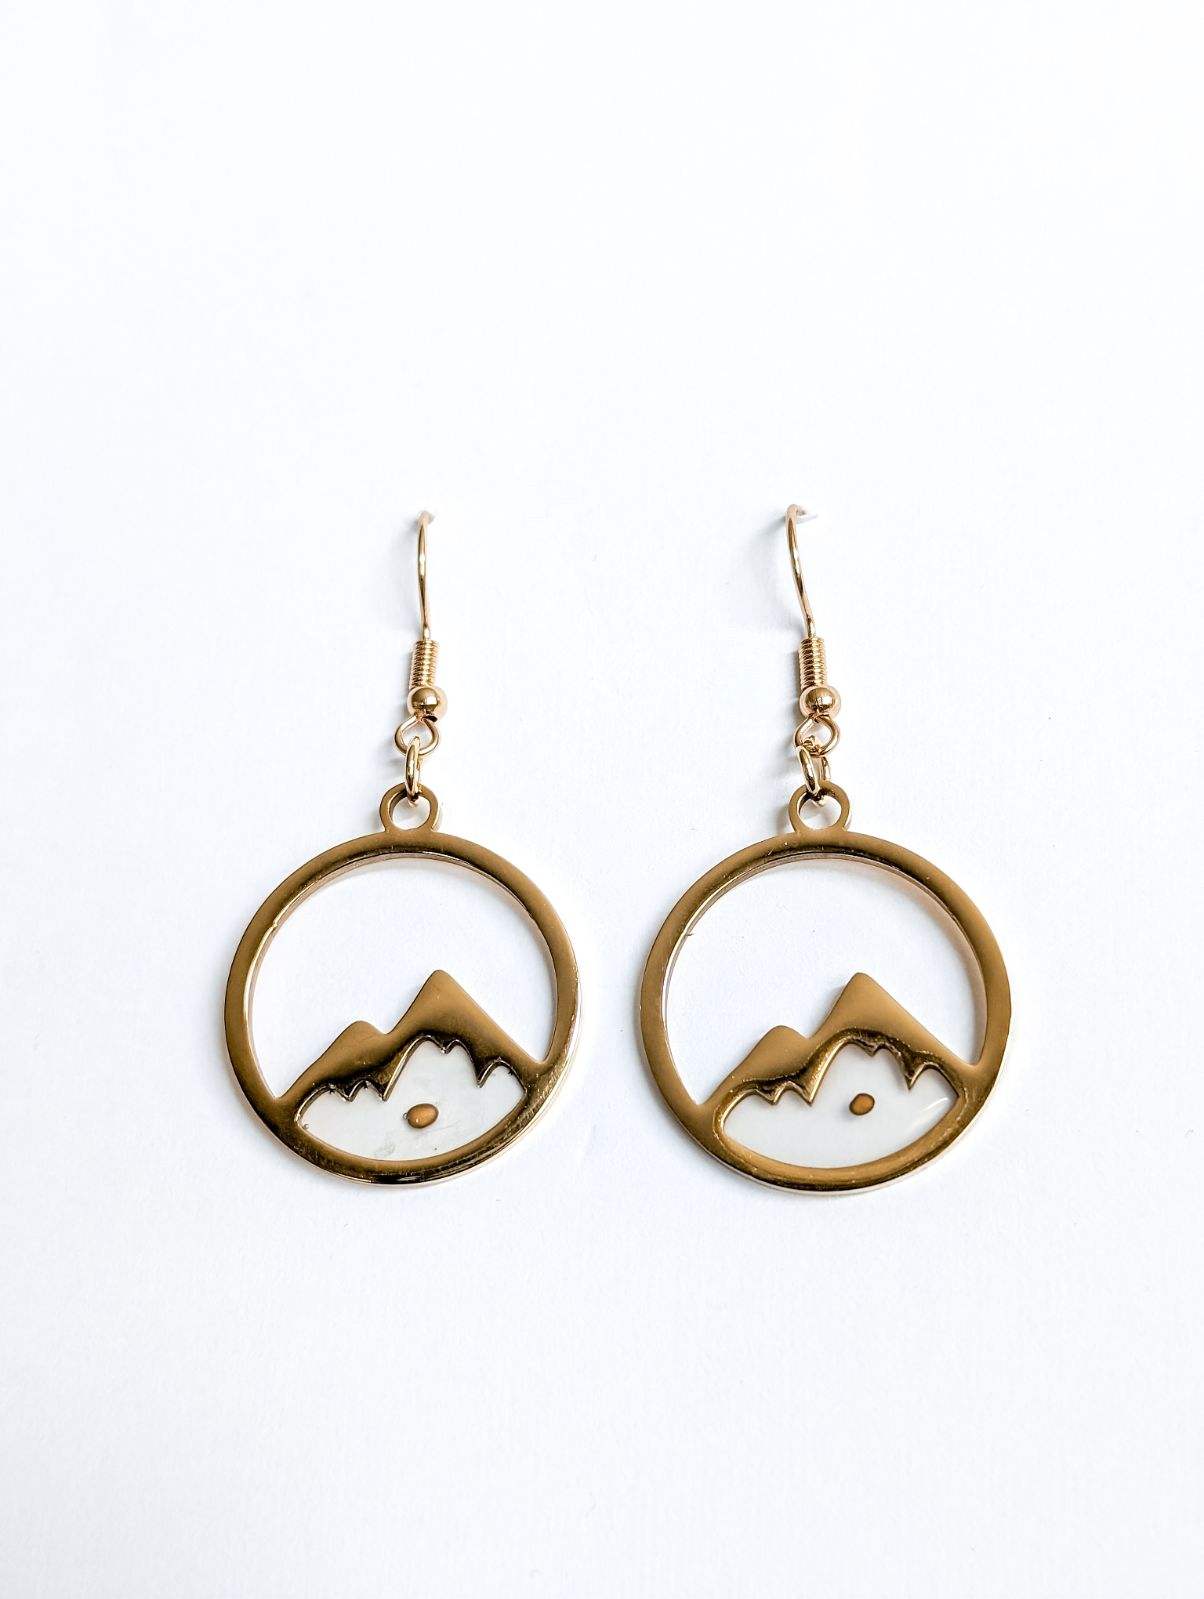 Beautiful Gold or Silver Mountain and Mustard Seed Faith Earrings